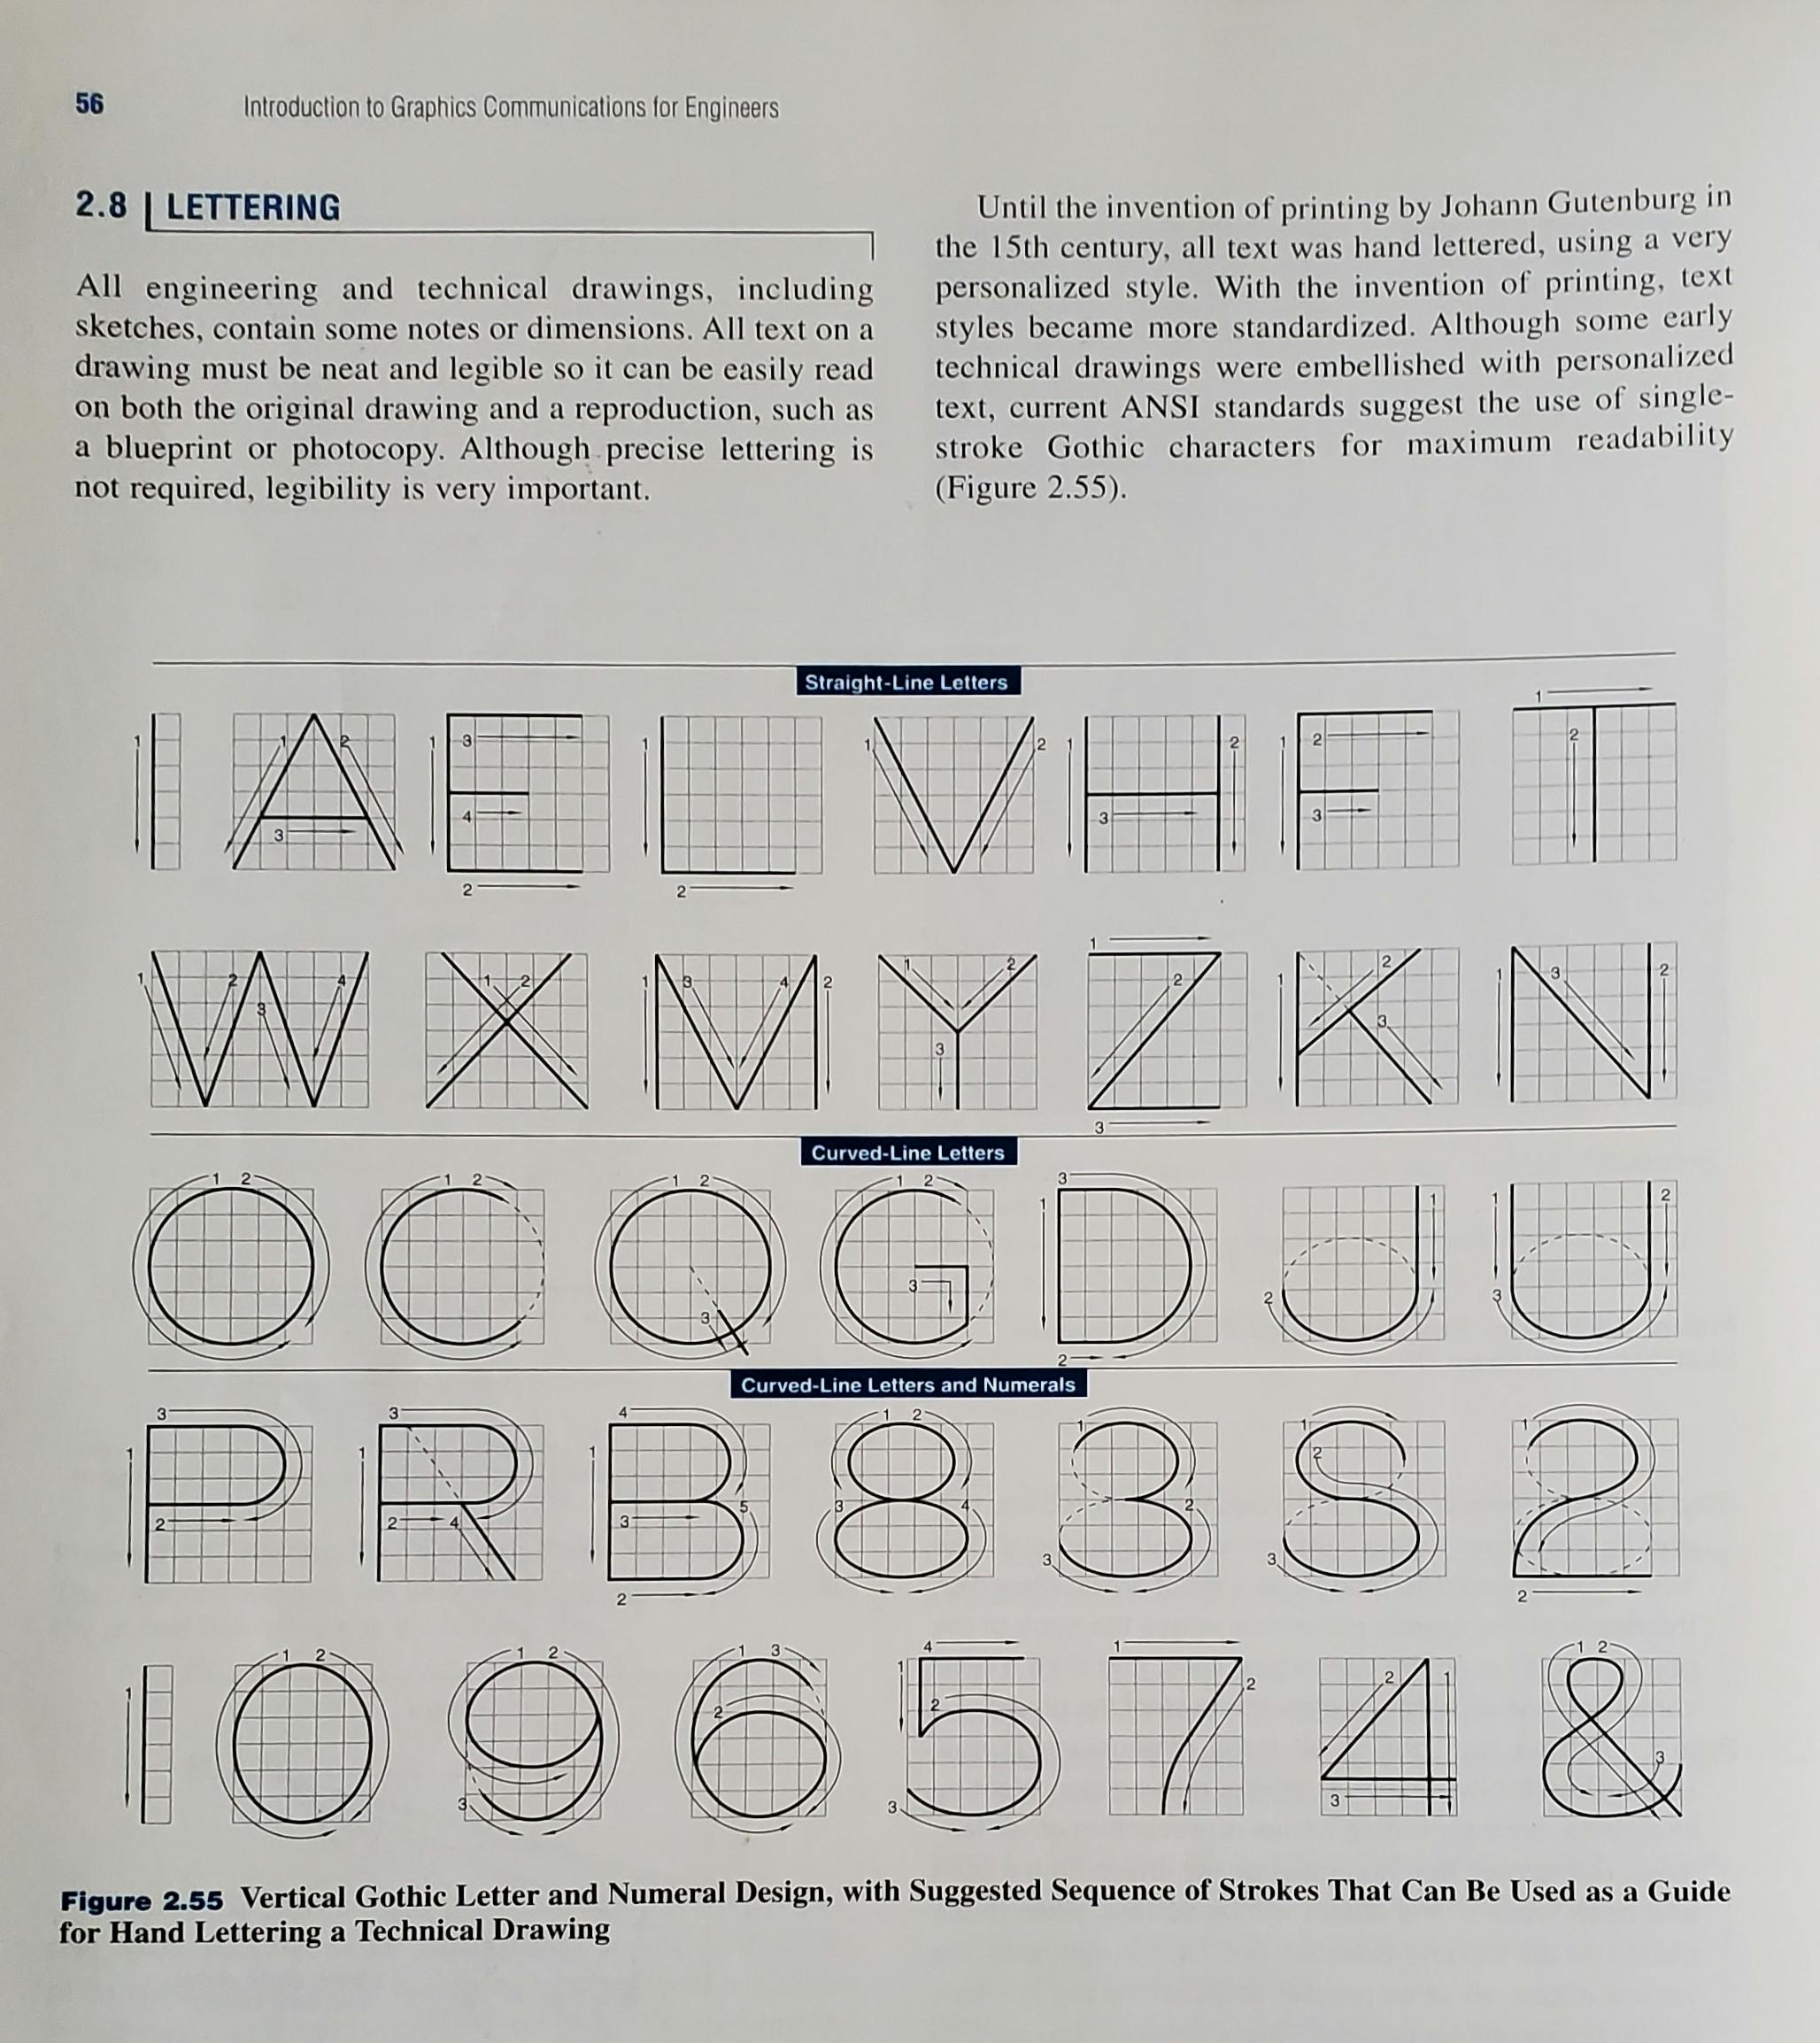 Page 56 of Introduction to Graphics Communications for Engineers, describing why legible writing is important in engineering with diagrams for each letter and number to draw them in a consistent and legible way